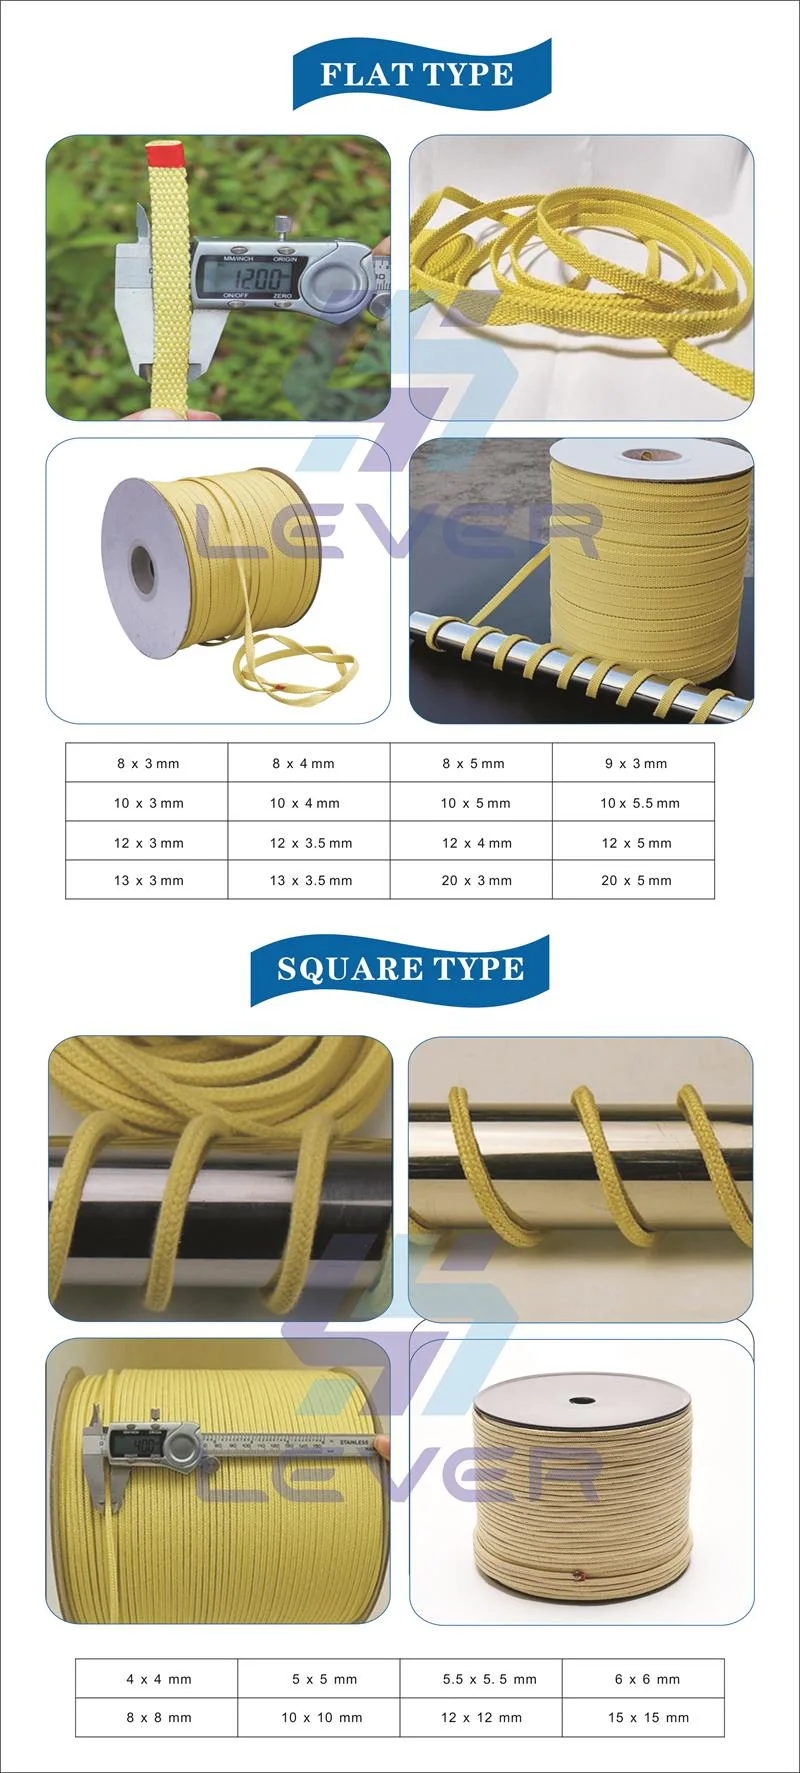 Fire-Resistant Aramid Rope, Fire-Resistant Aramid Kevlar Rope, Yellow Aramid Fiber Webbing for Fire Safety Clothing